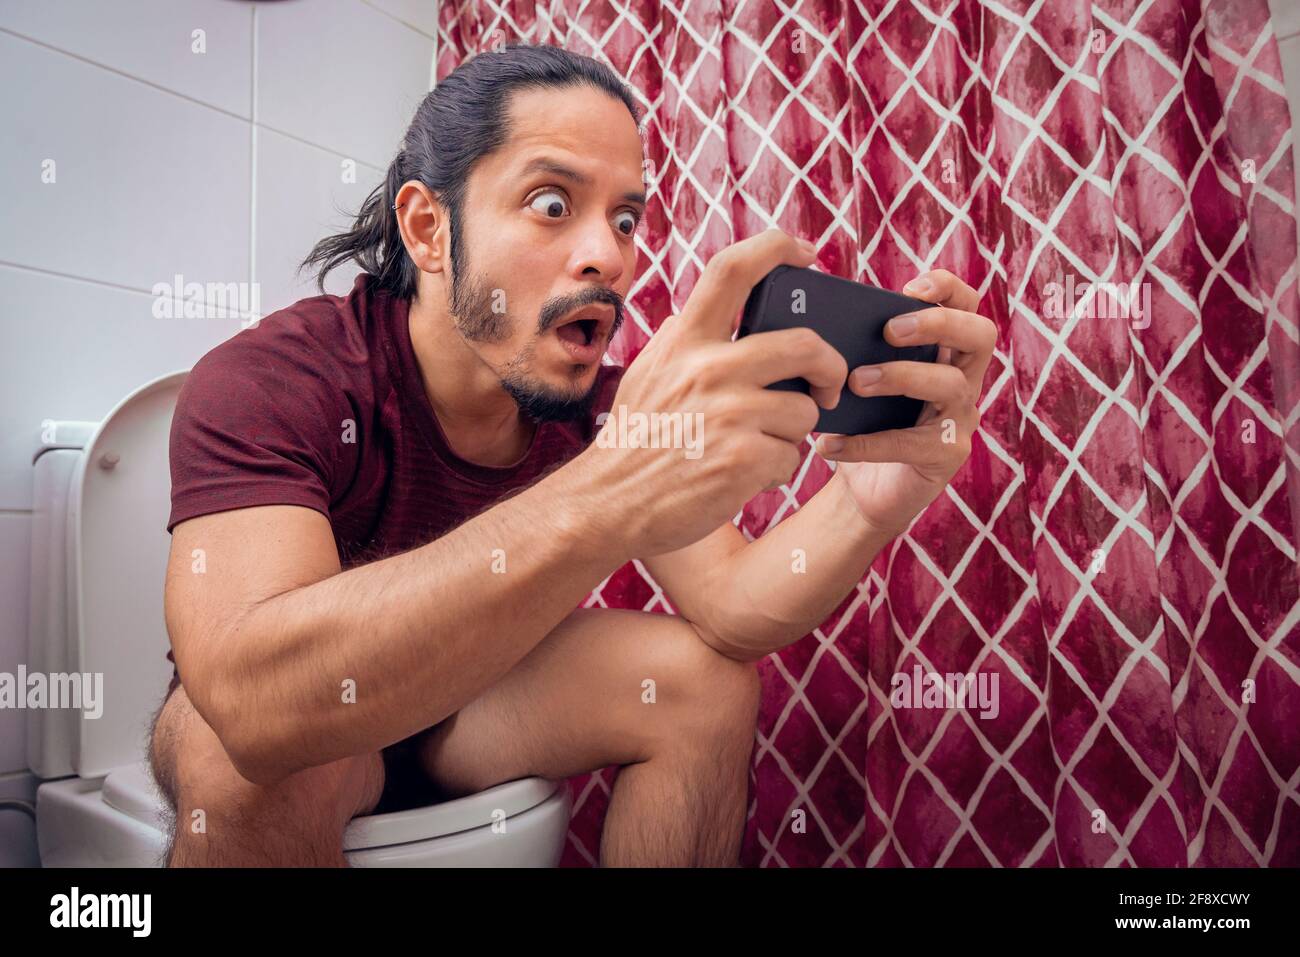 Young latin man smiling on the toilet using a smart phone at the bathroom. Stock Photo